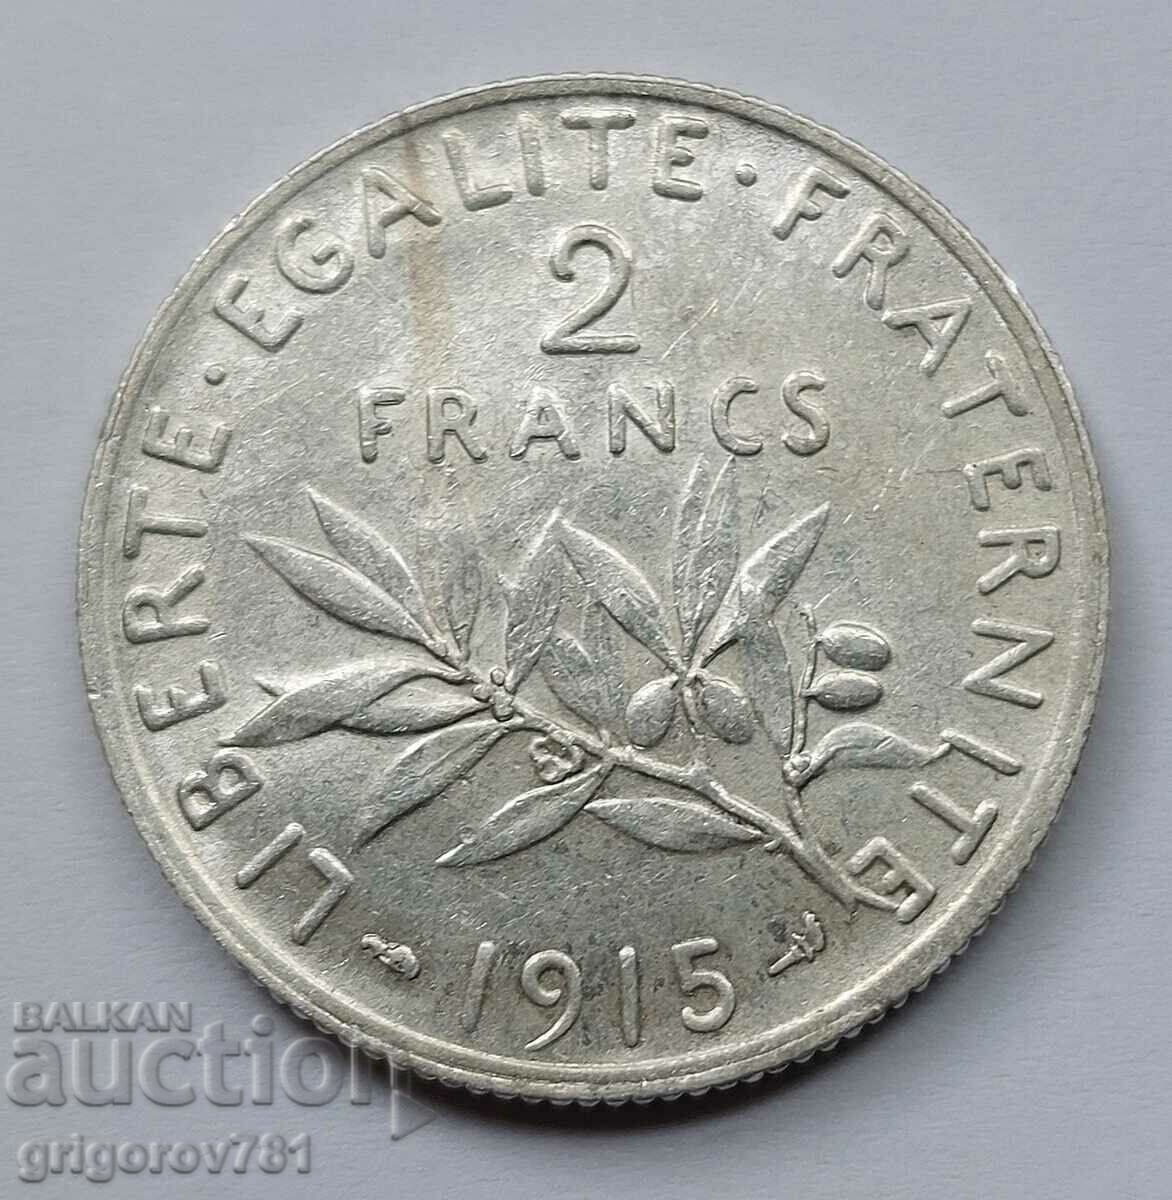 2 Francs Silver France 1915 - Silver Coin #119